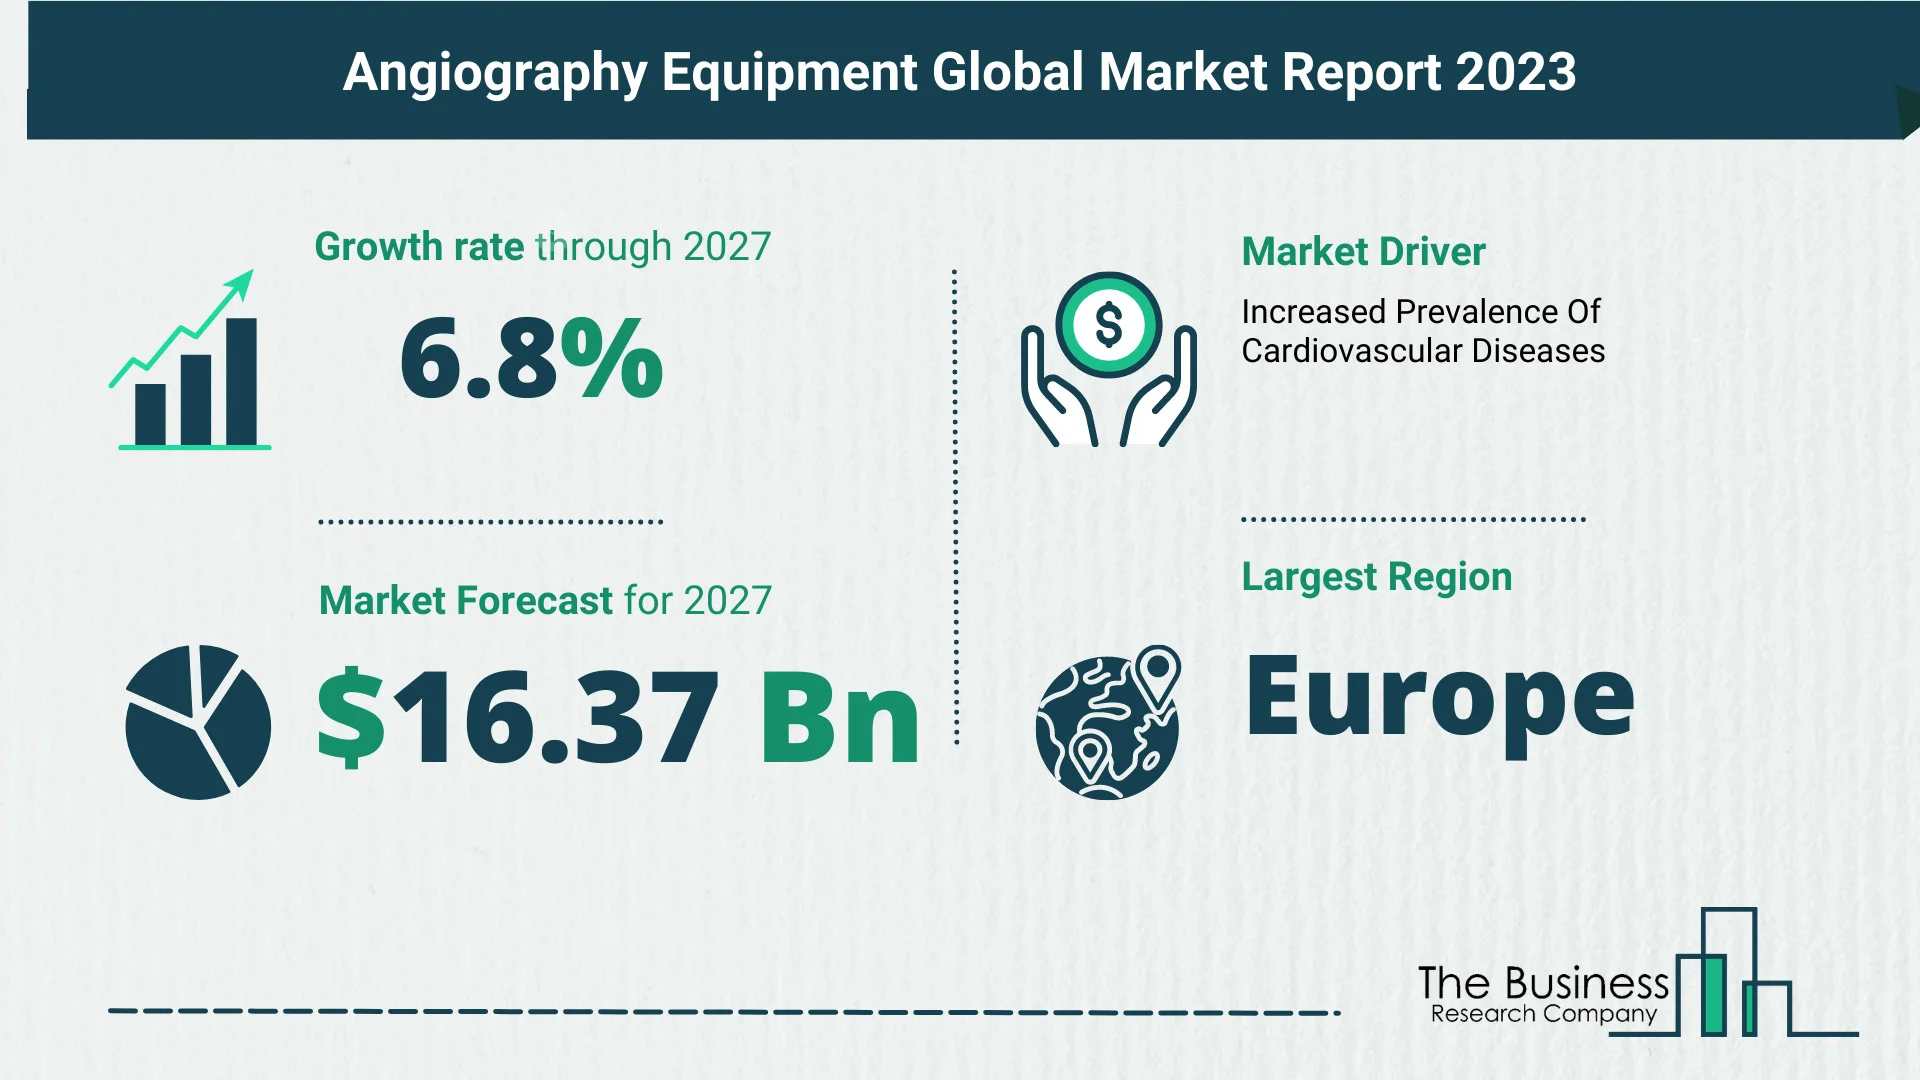 Global Angiography Equipment Market Analysis 2023: Size, Share, And Key Trends